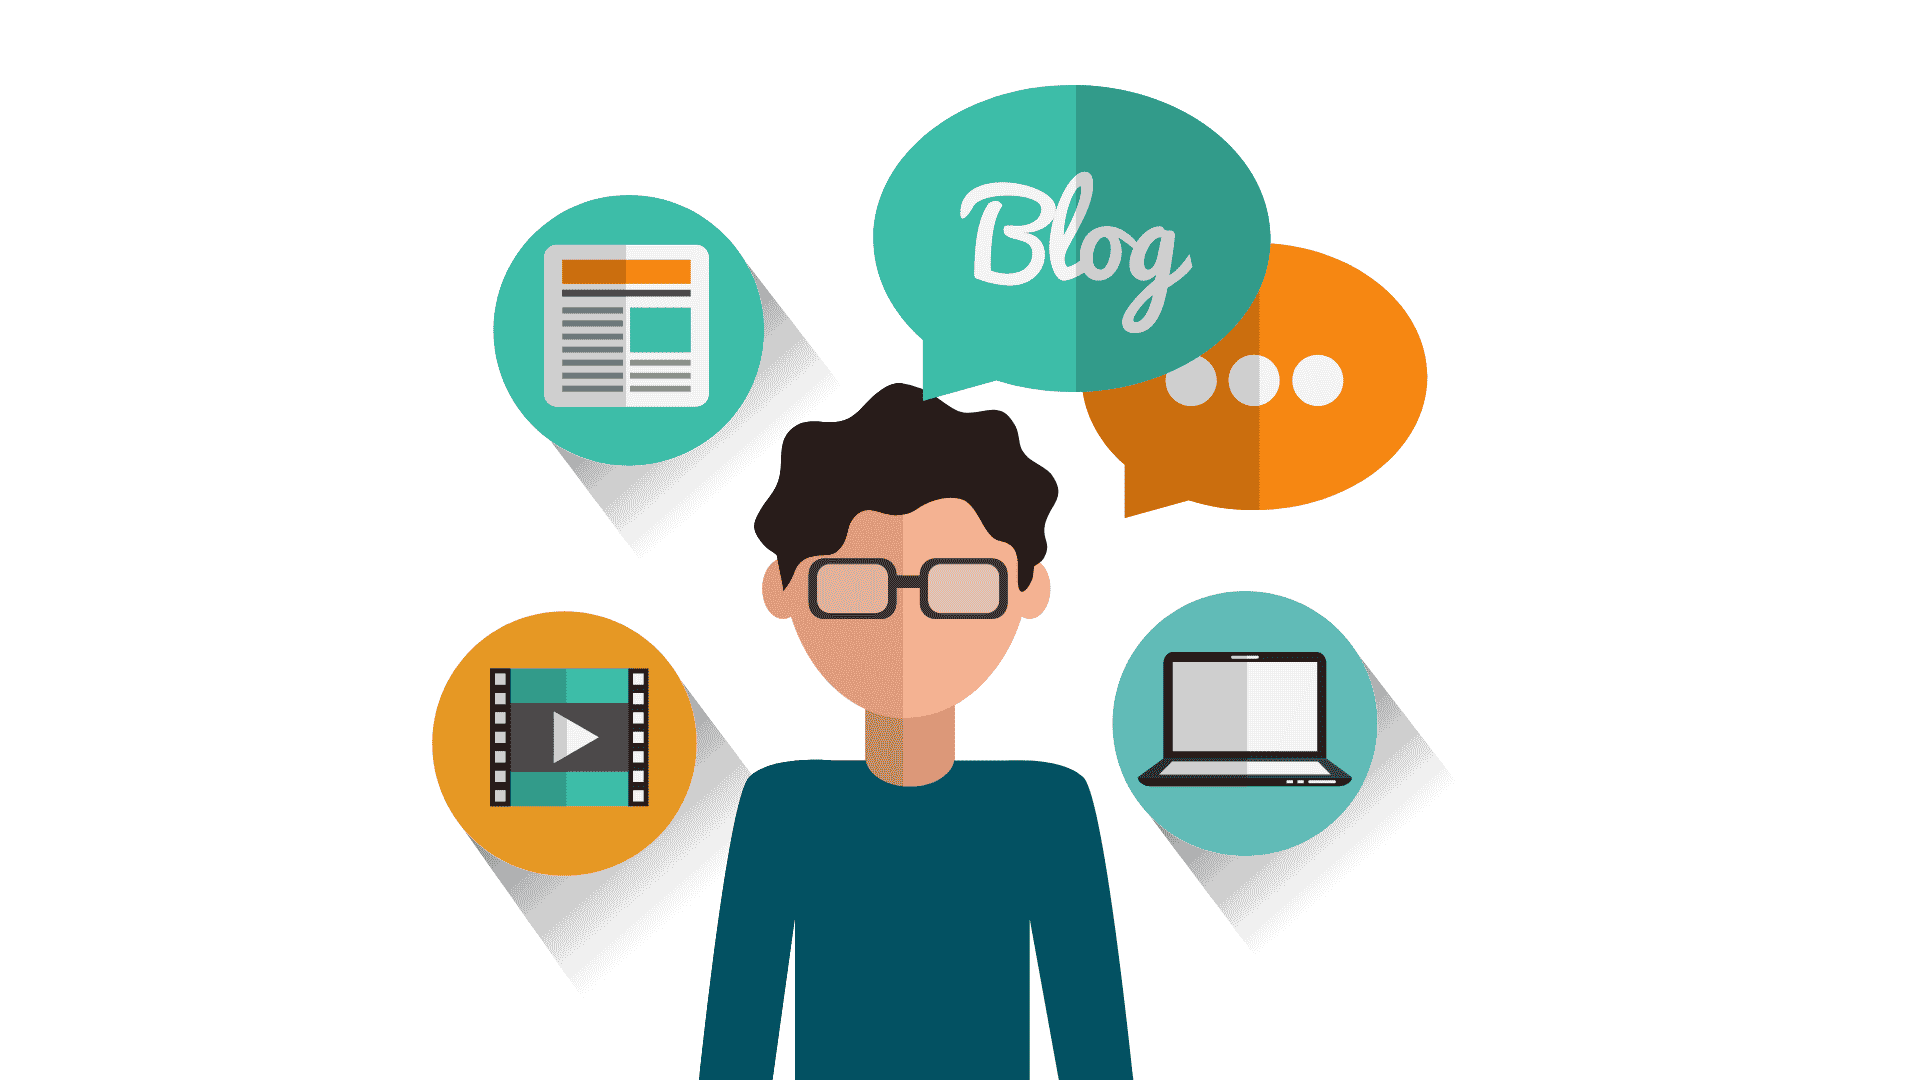 What website builder offers more features in creating blogs?